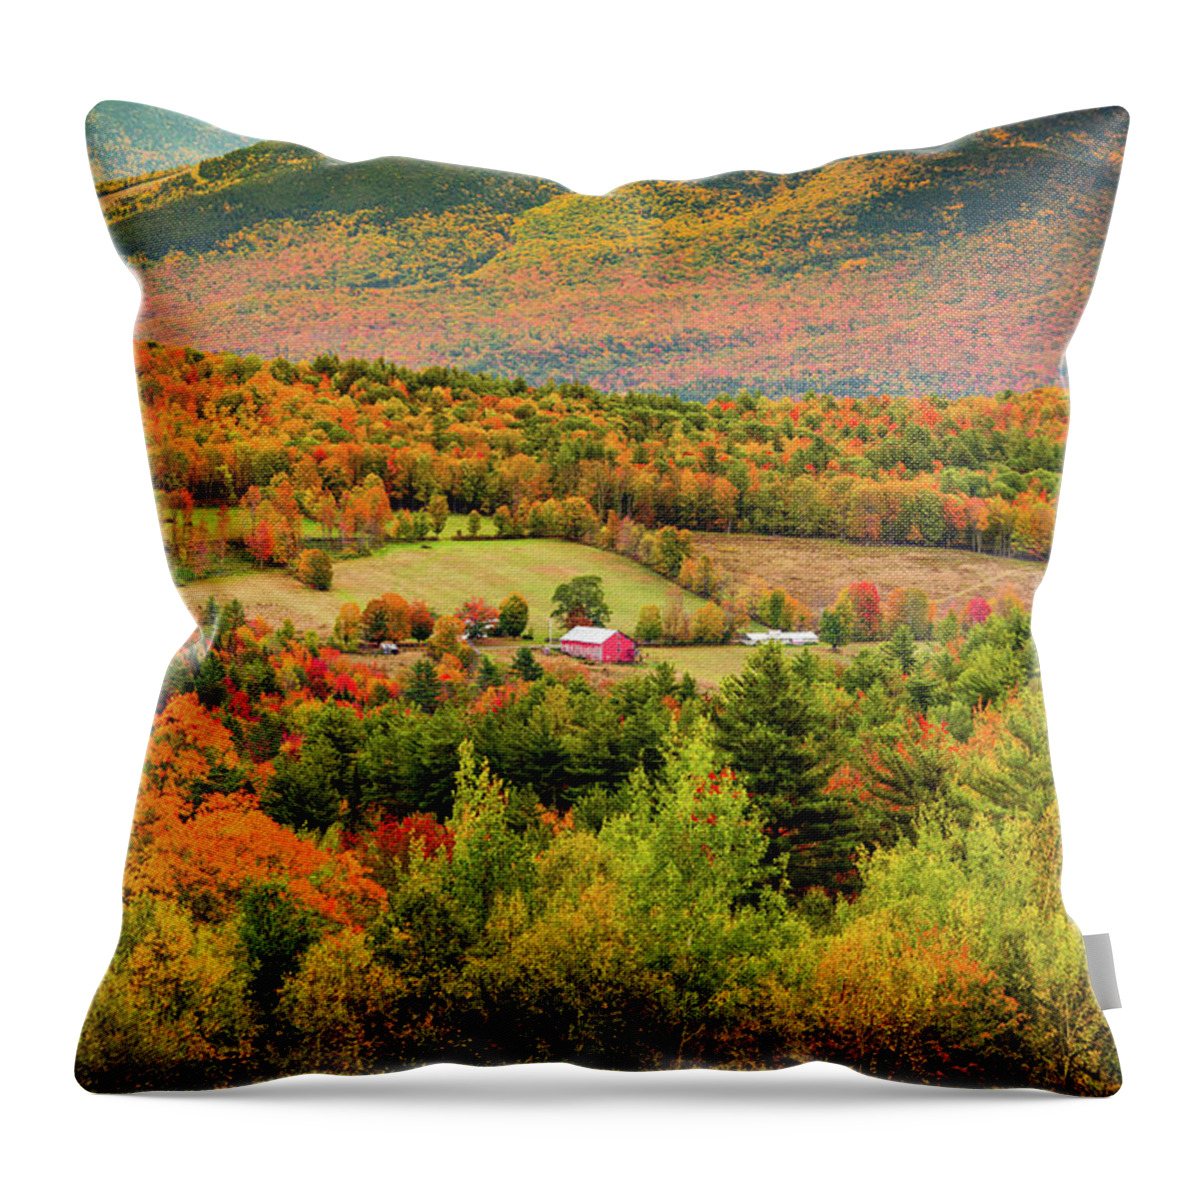 Franconia Notch Throw Pillow featuring the photograph Sugar Hill New Hampshire by Robert Clifford